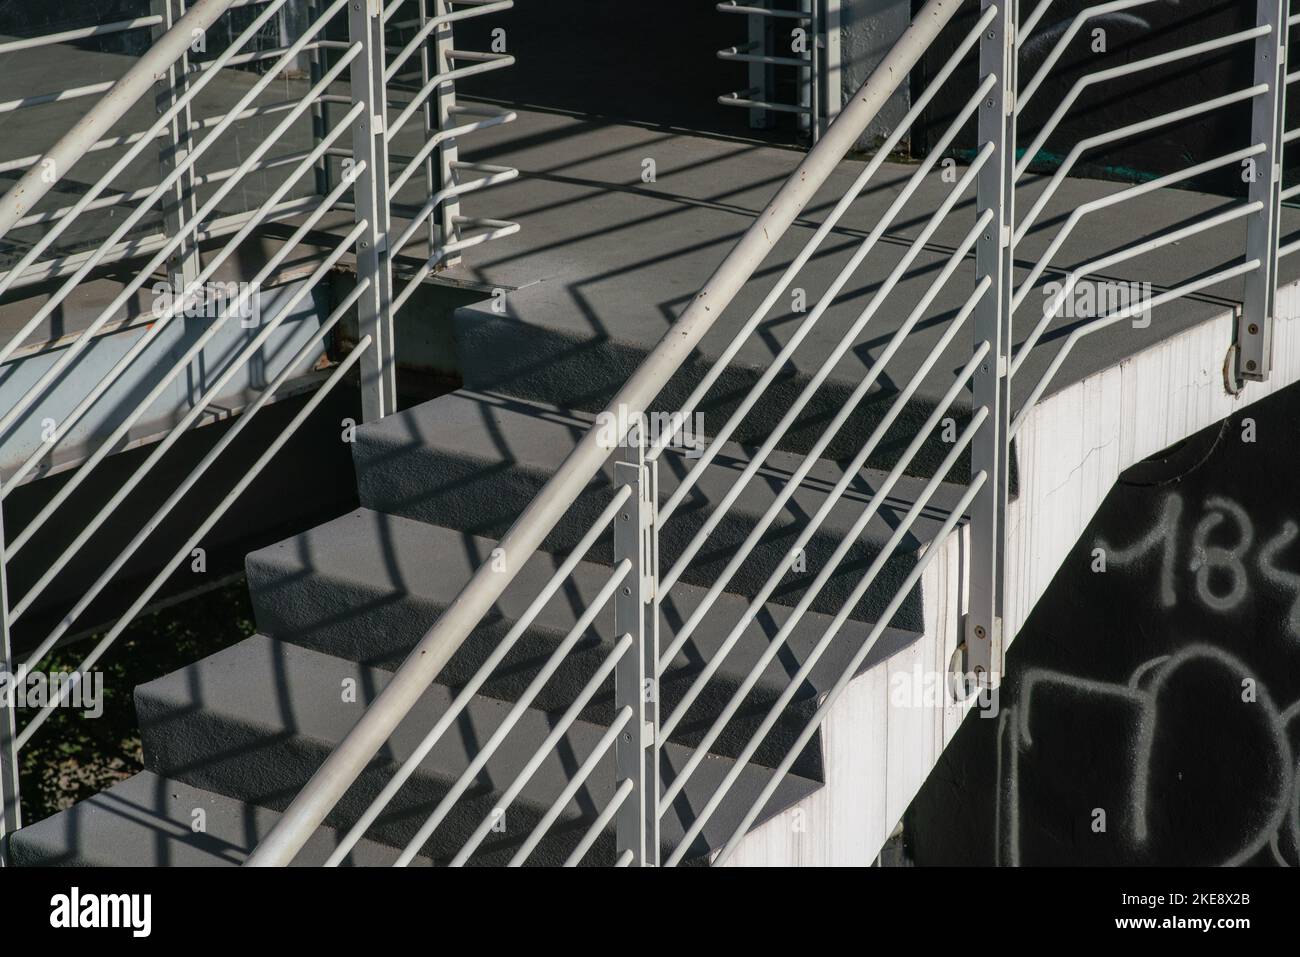 staircase architecture: detail of the external stairs with concrete steps and the railing and handrail and in white painted steel. Stock Photo